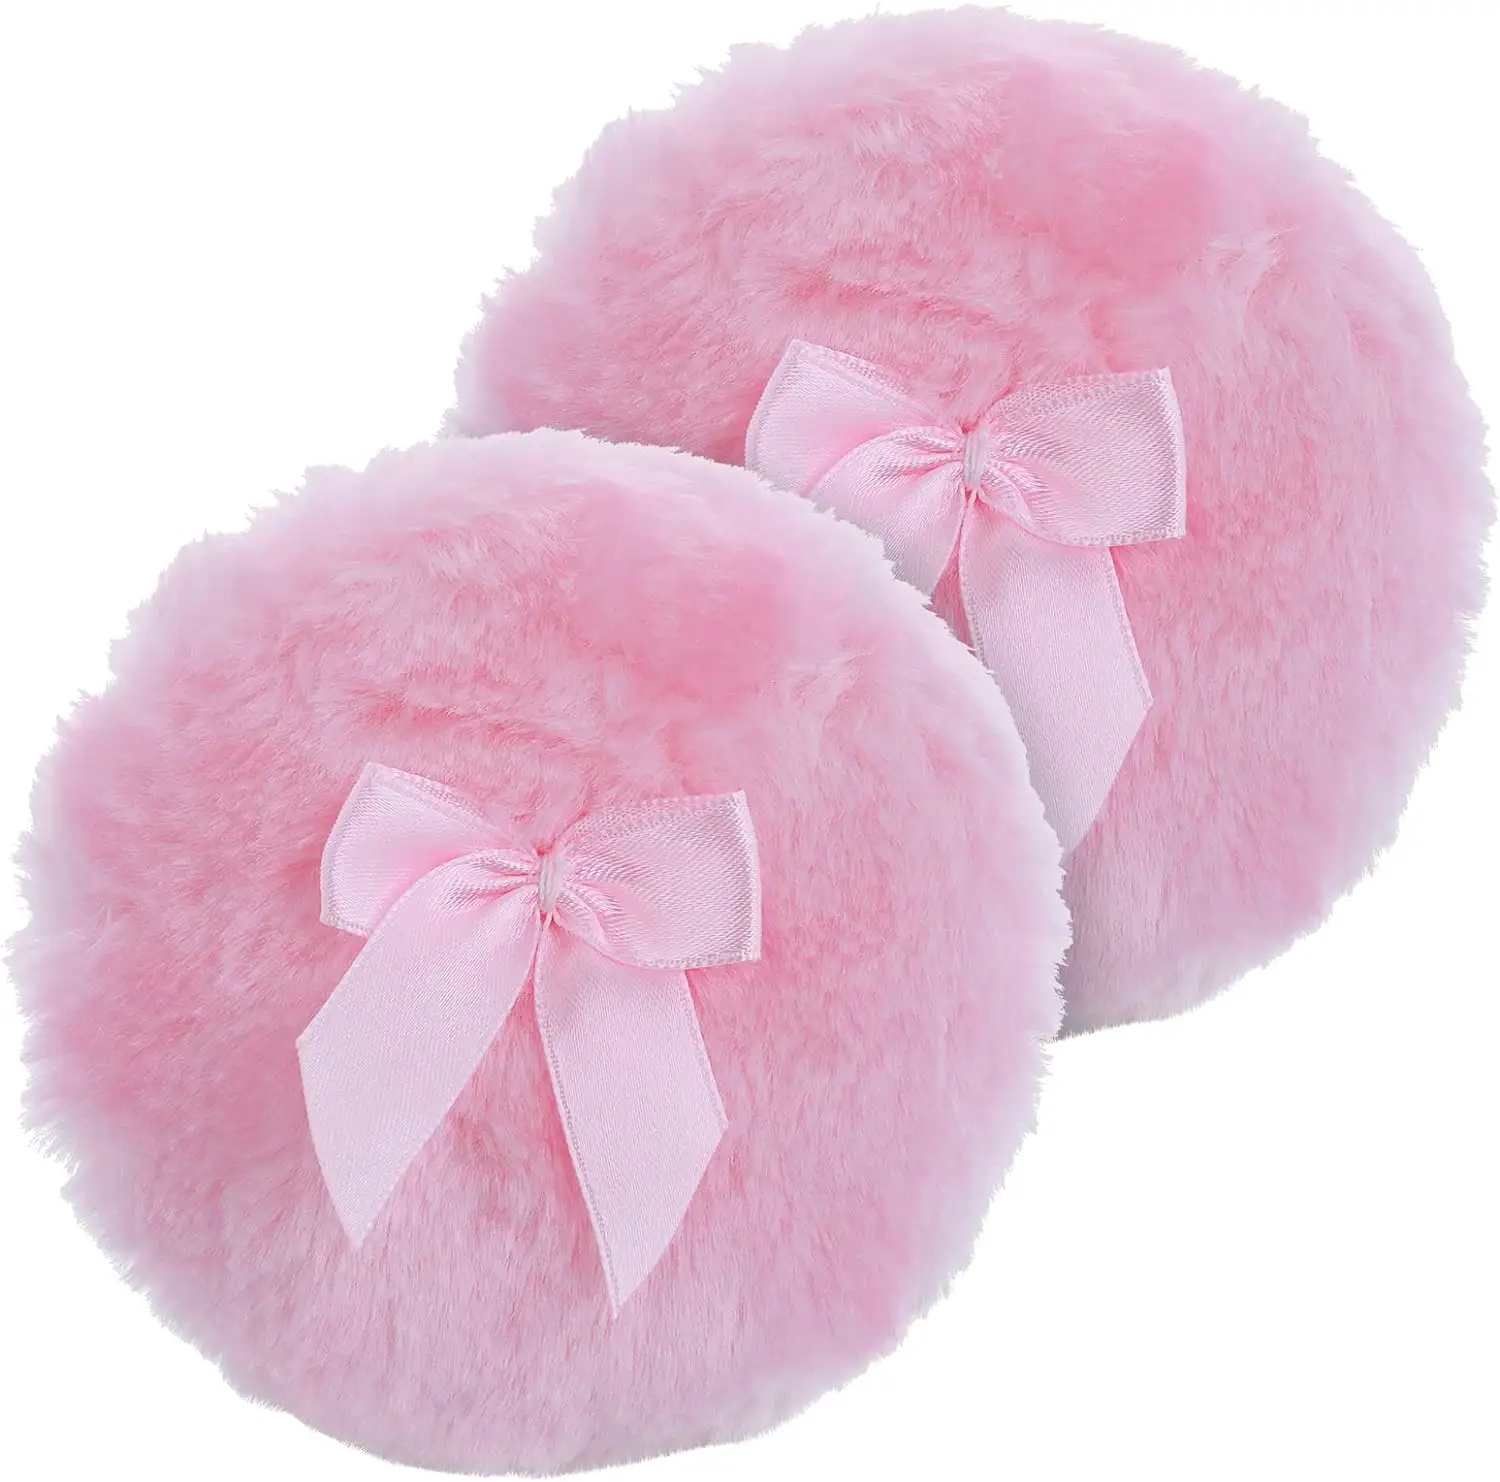 Large Fluffy Powder Puff, 4 Inch Ultra Soft Washable Reusable Loose Powder Puffs Wet Dry Makeup Tool